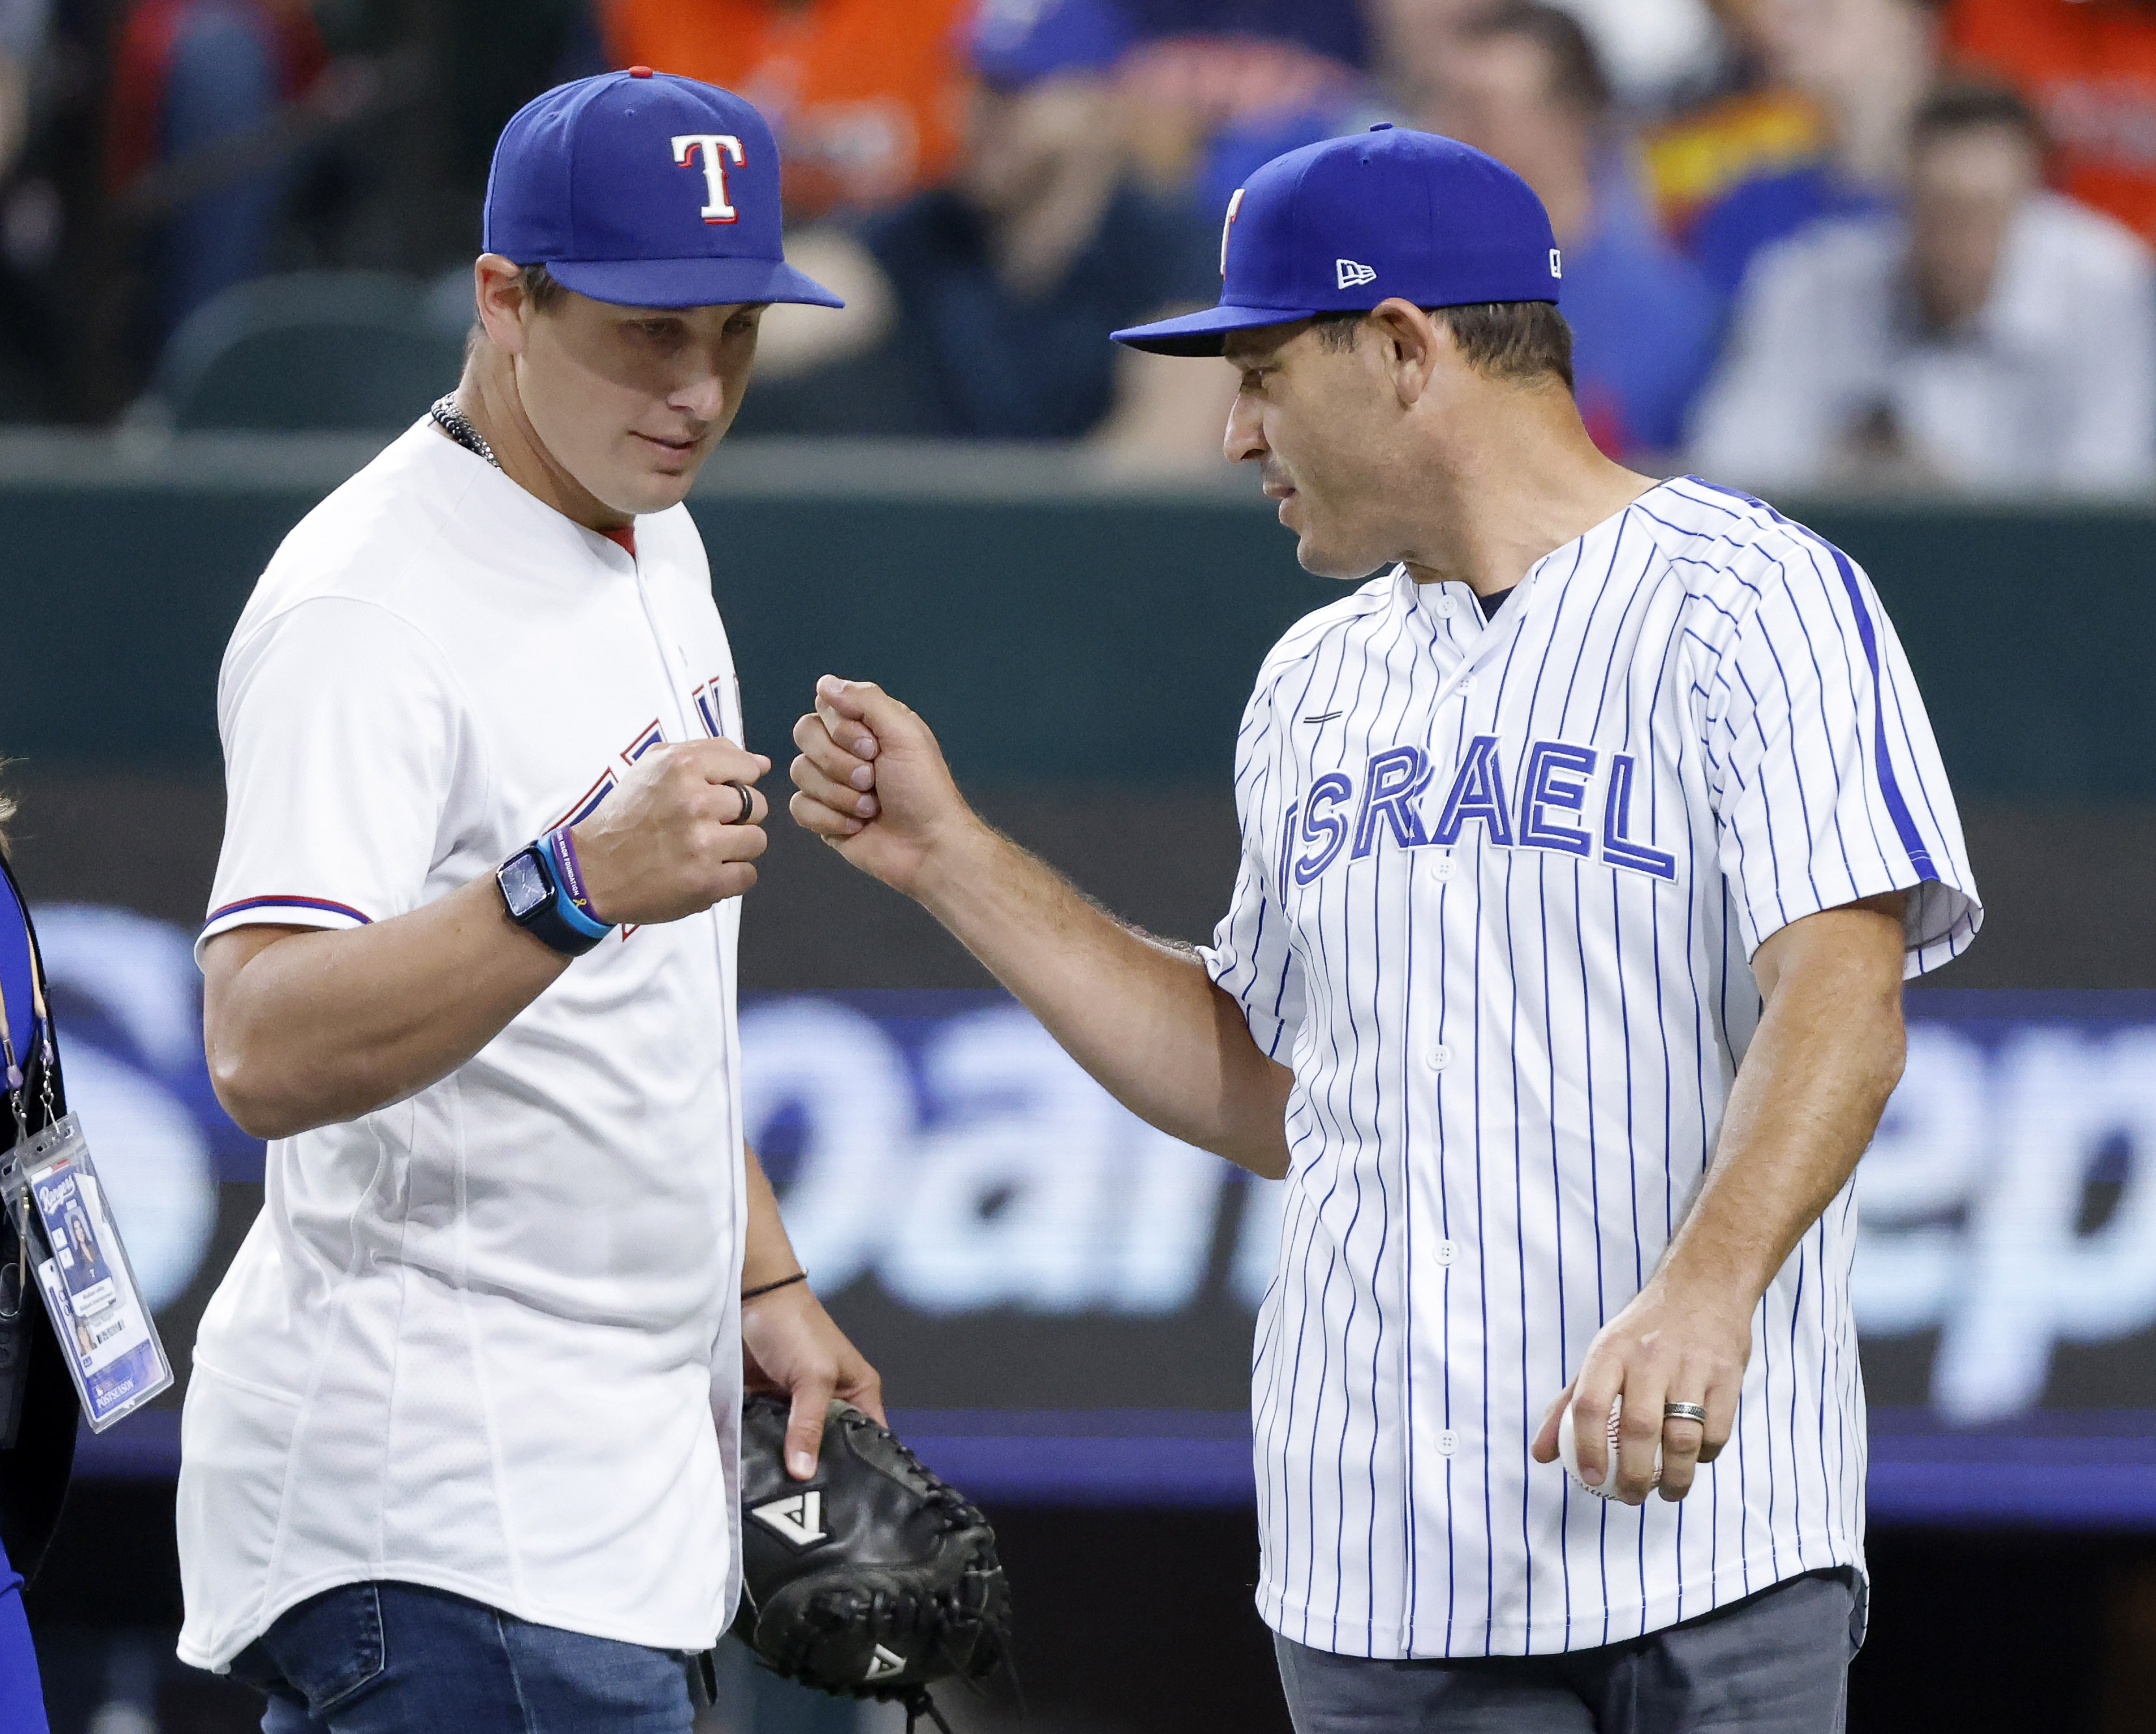 Ian Kinsler wears Team Israel jersey to throw out first pitch at